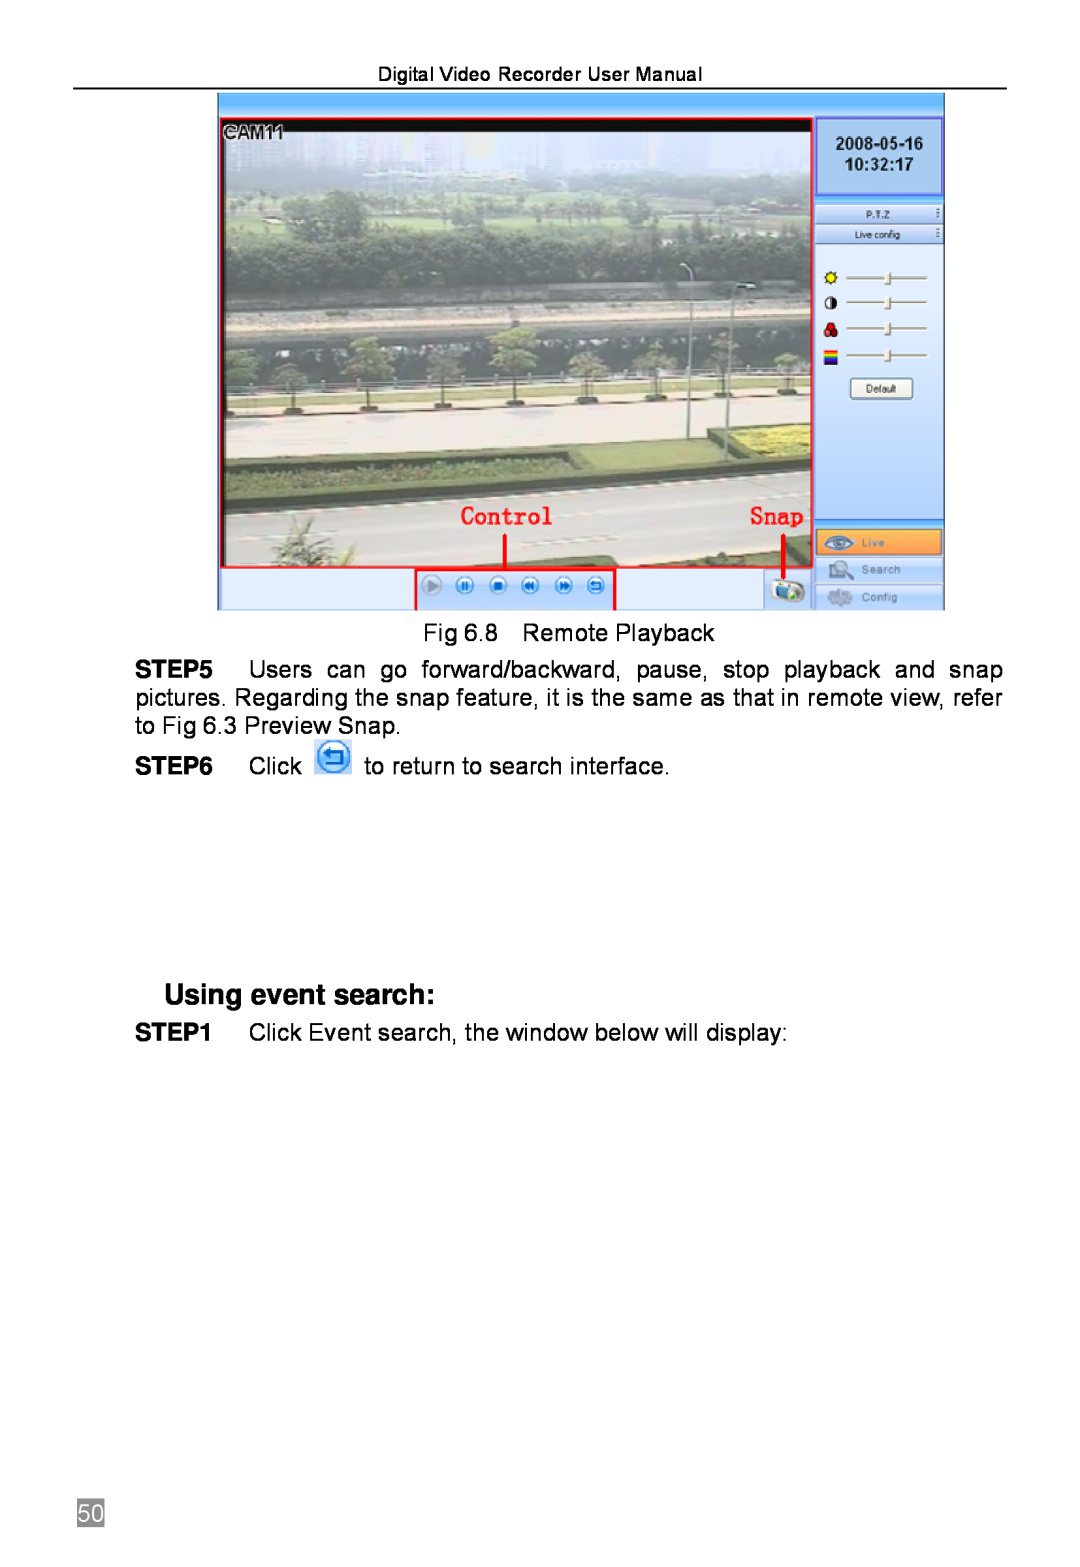 Q-See QSTD2416, QSTD2408, QSTD2404 user manual Using event search, 8 Remote Playback, Click to return to search interface 